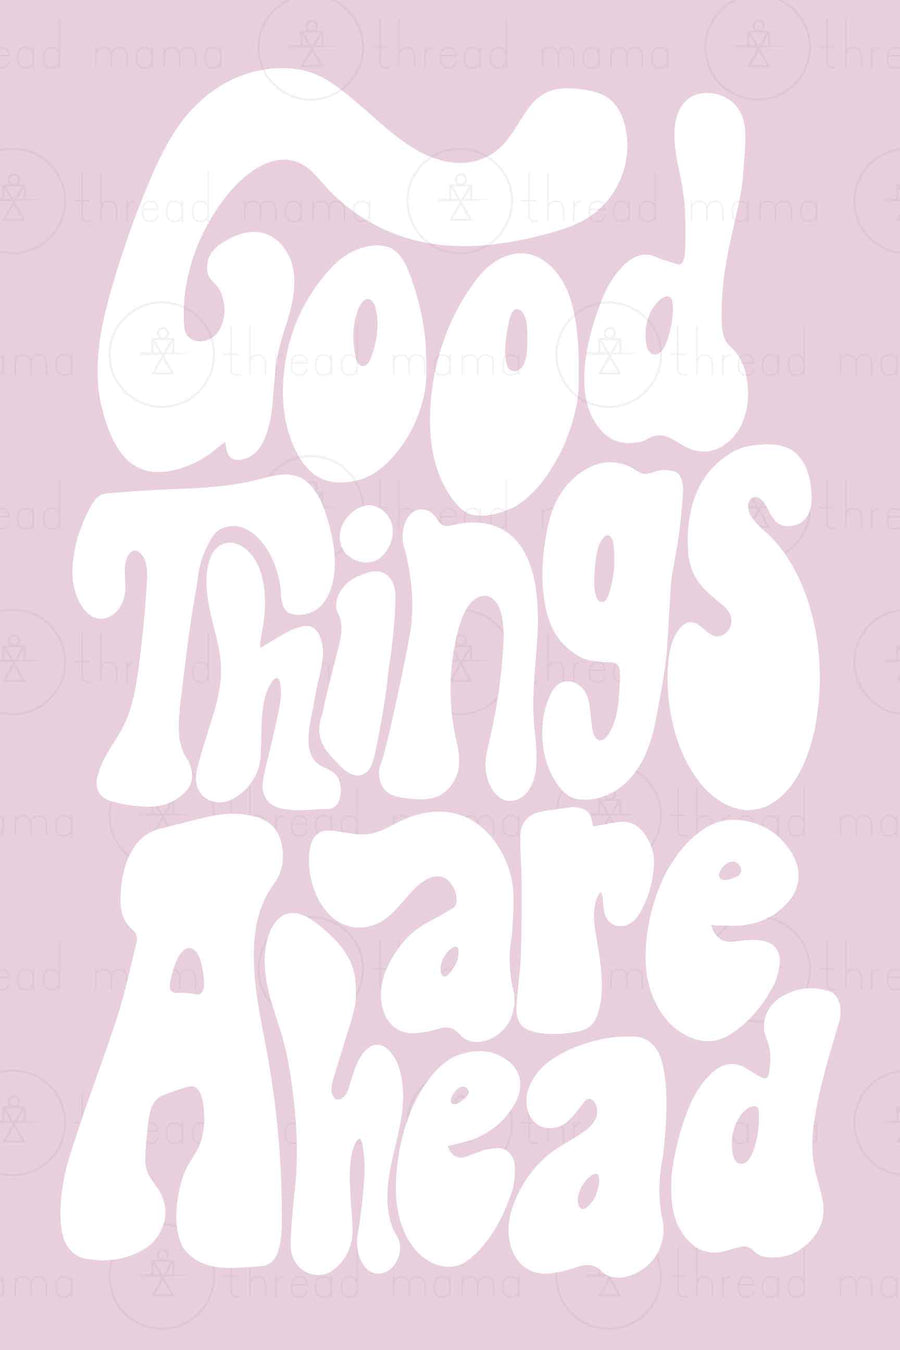 Good Things Are Ahead Collection (Printable Poster)